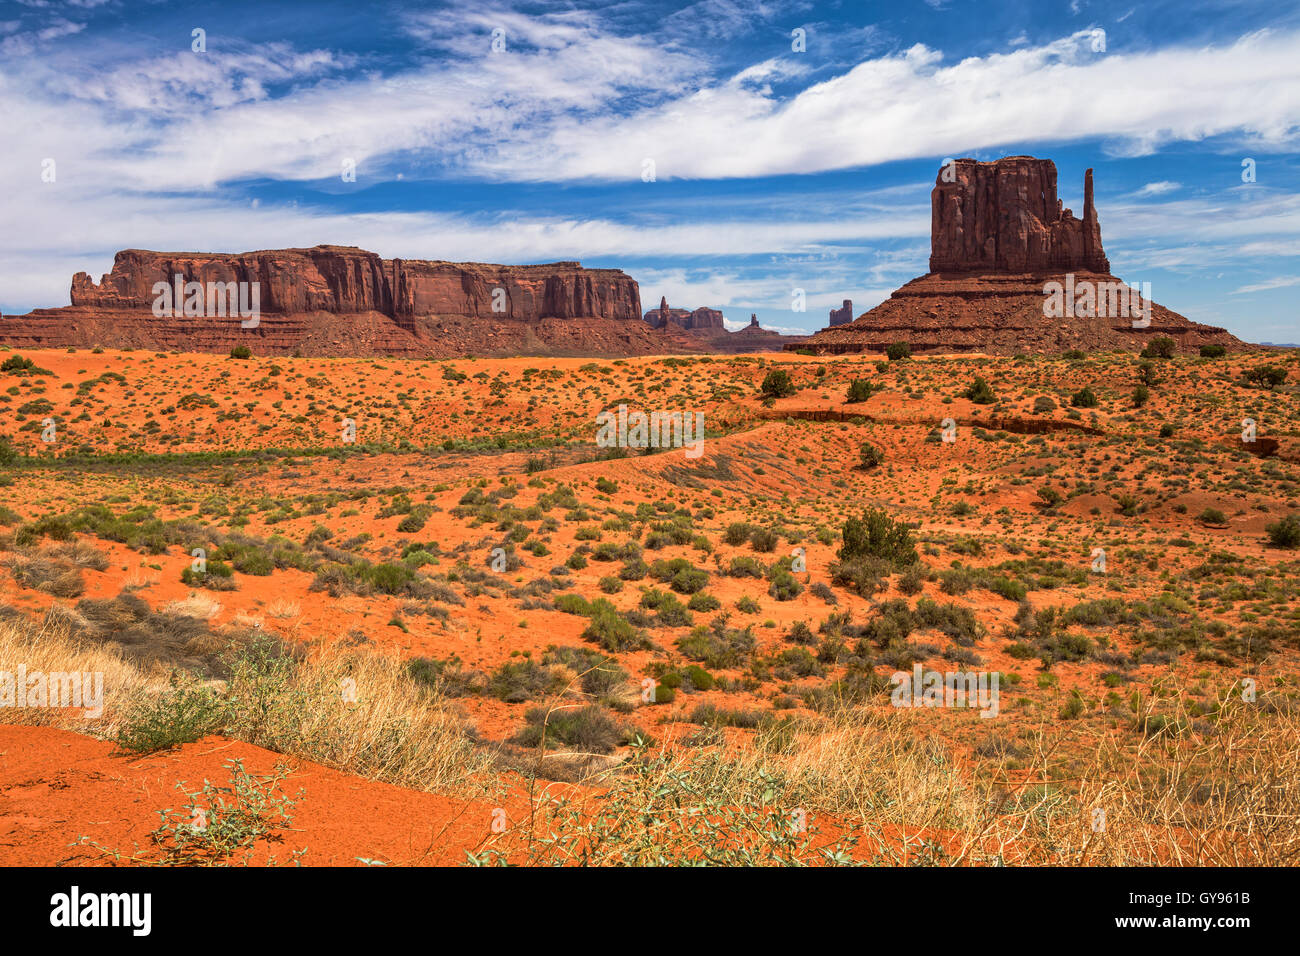 Monument Valley, Arizona scenic desert landscape with clouds and blue sky Stock Photo